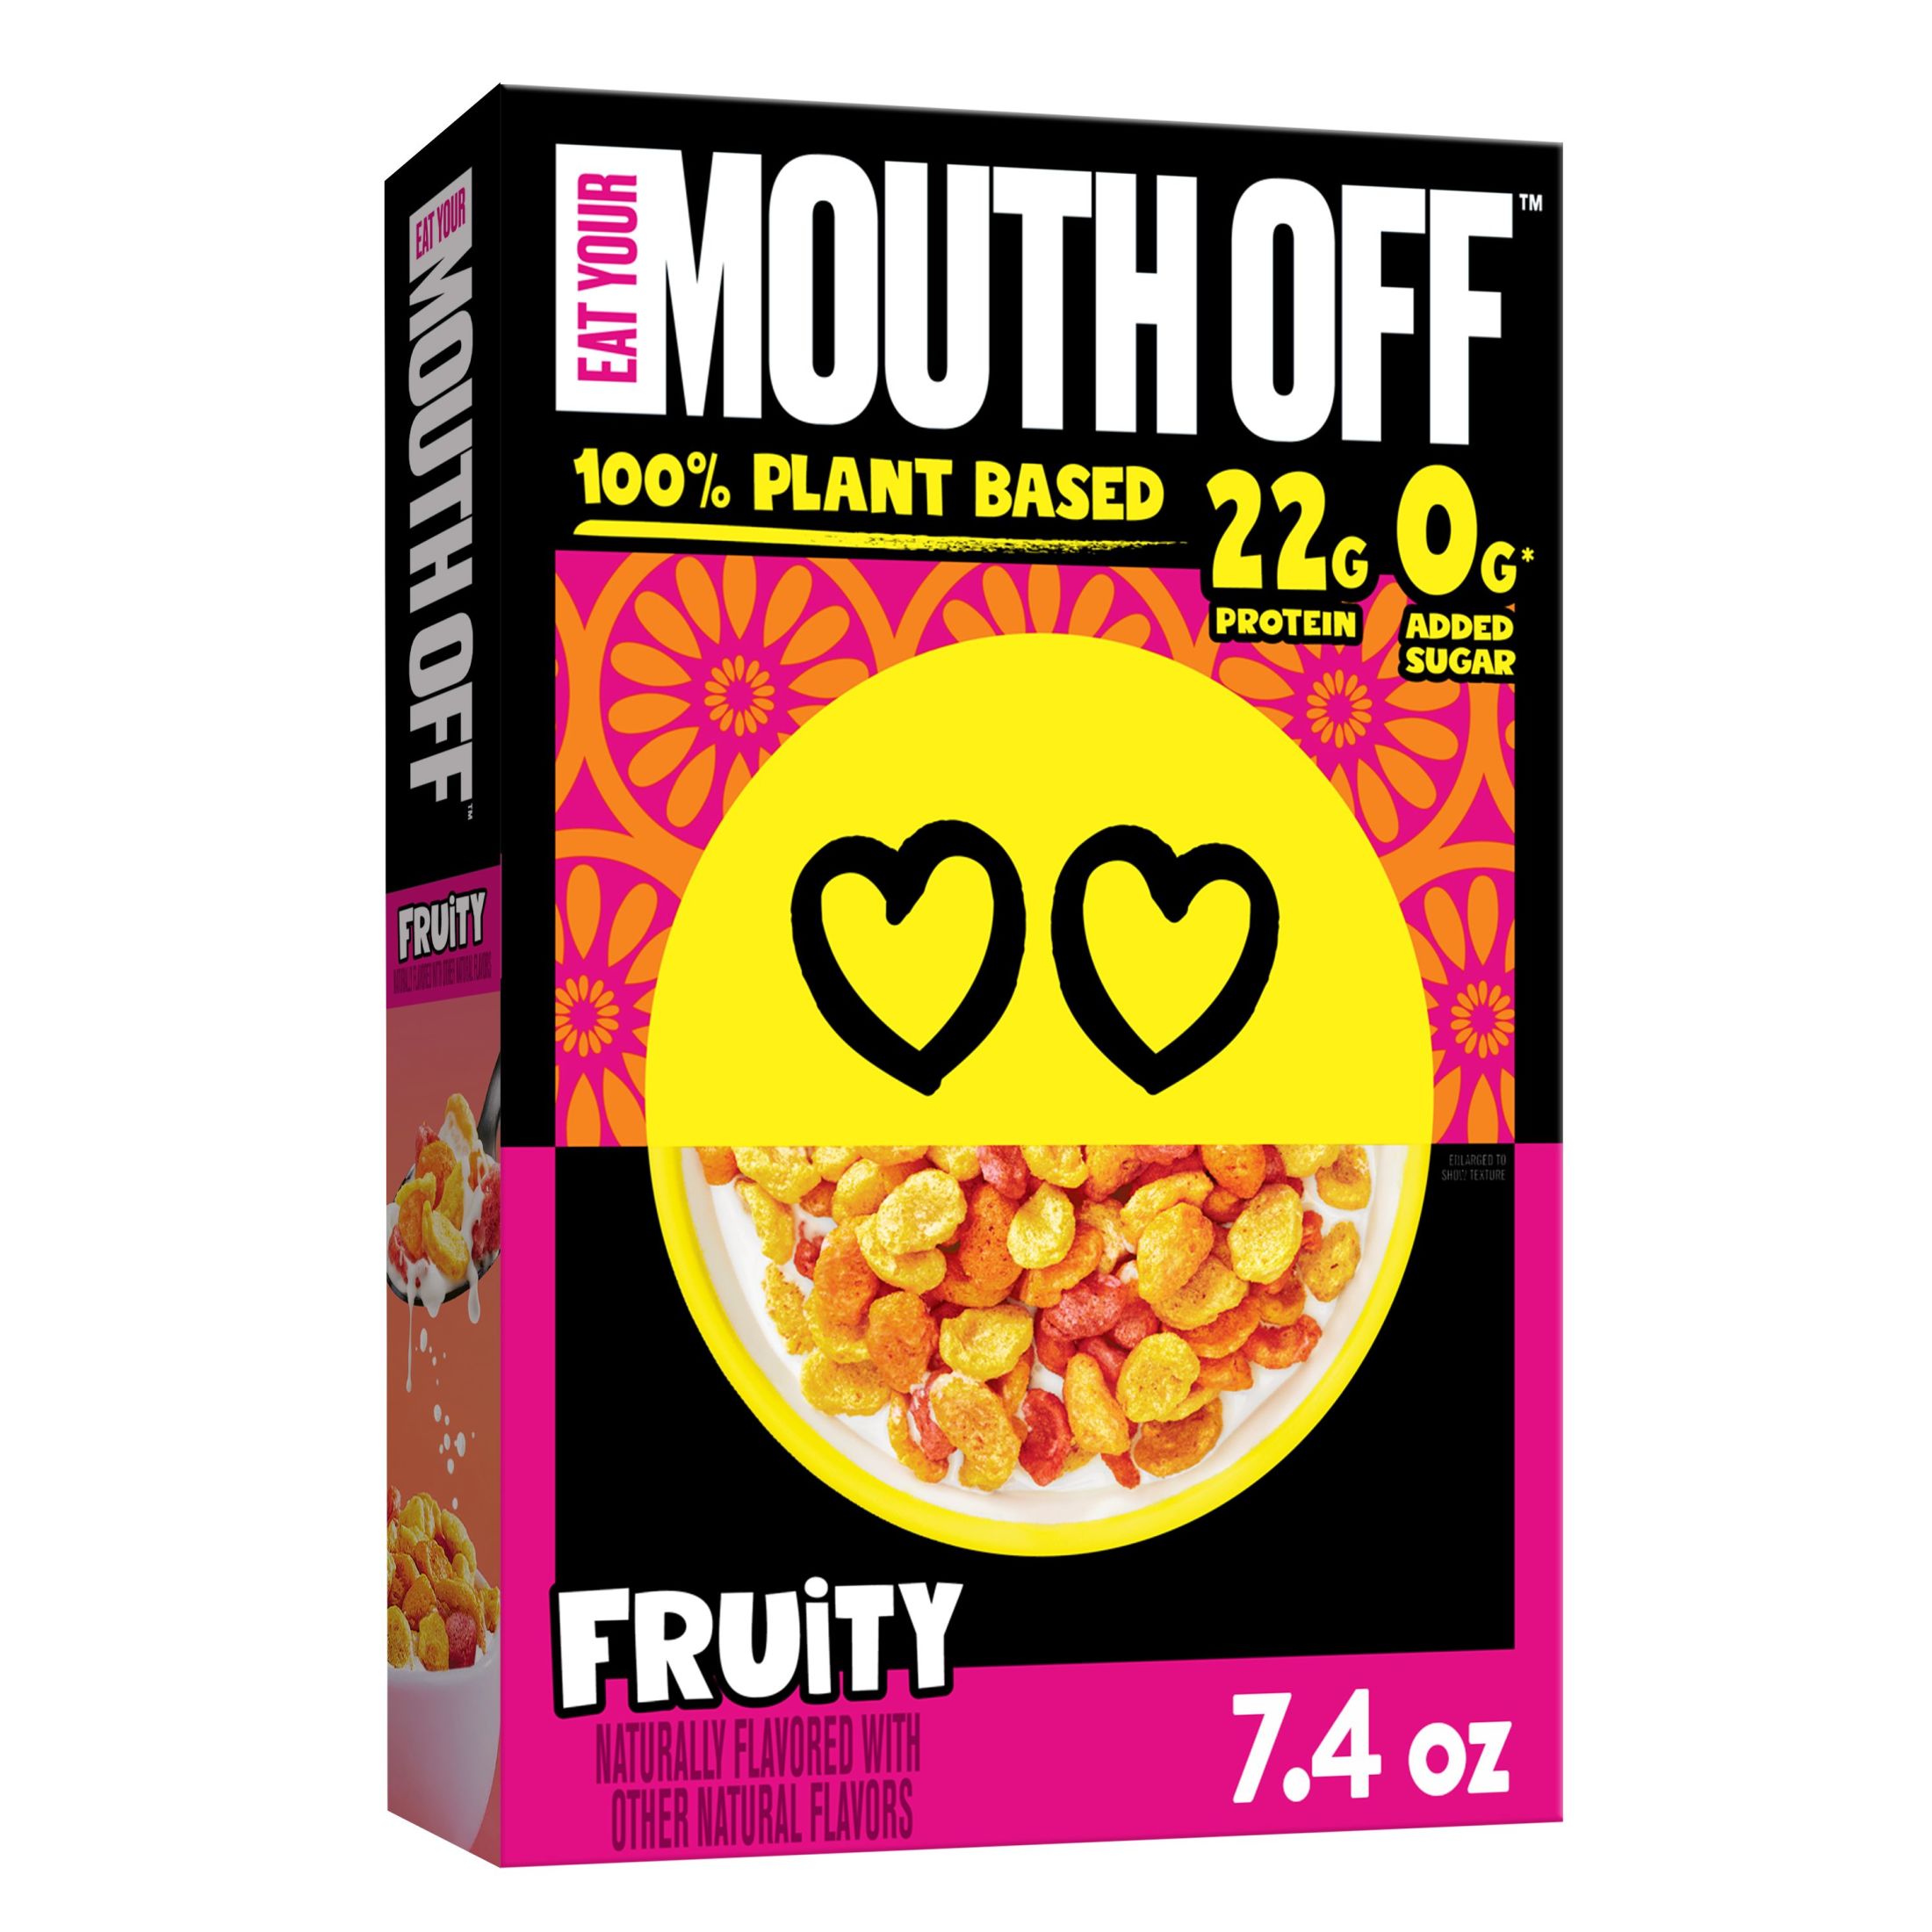 Eat Your Mouth Off Fruity Vegan, Plant Based Protein Cereal, 22g Protein, 7.4 oz Box - image 1 of 13